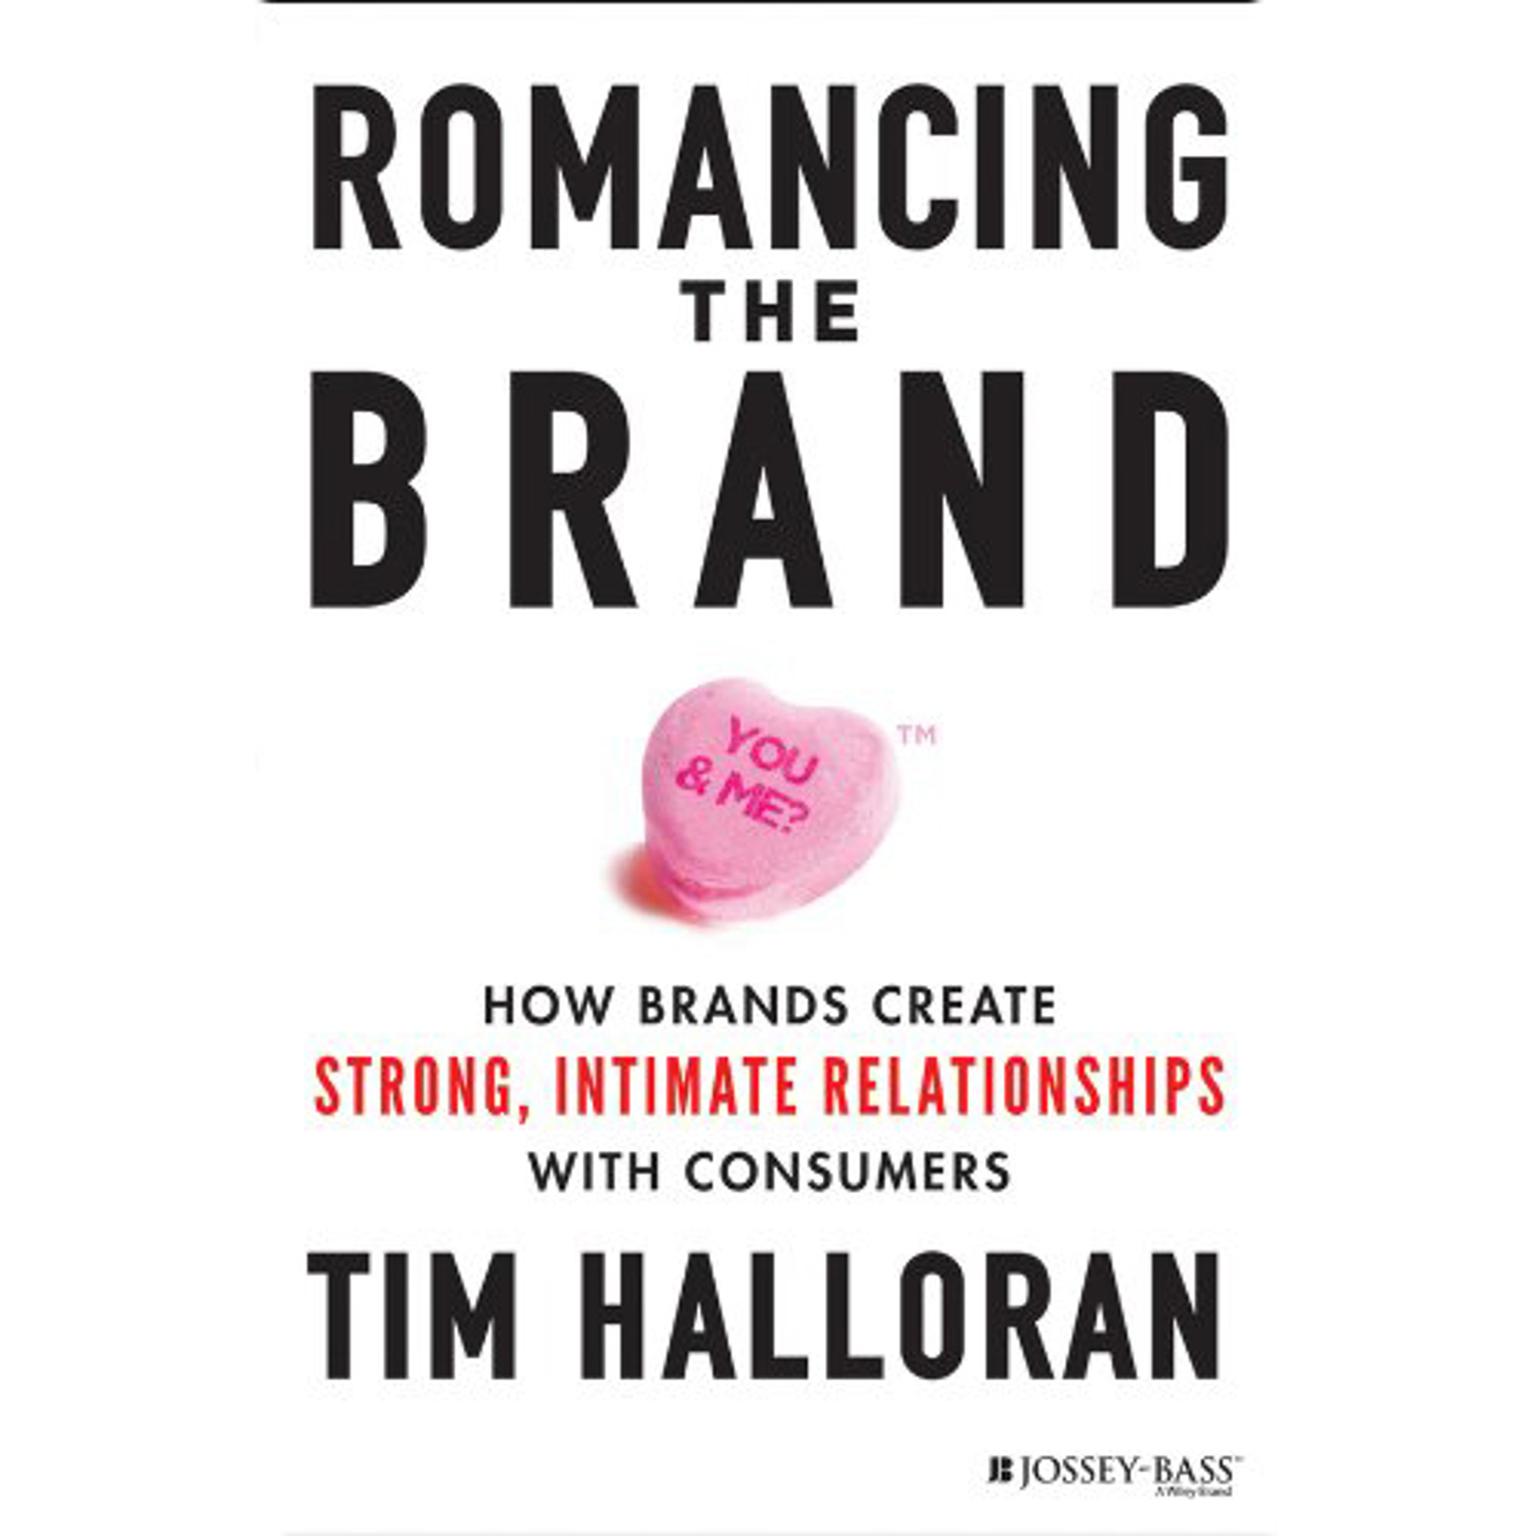 Romancing the Brand: How Brands Create Strong, Intimate Relationships with Consumers Audiobook, by Tim Halloran